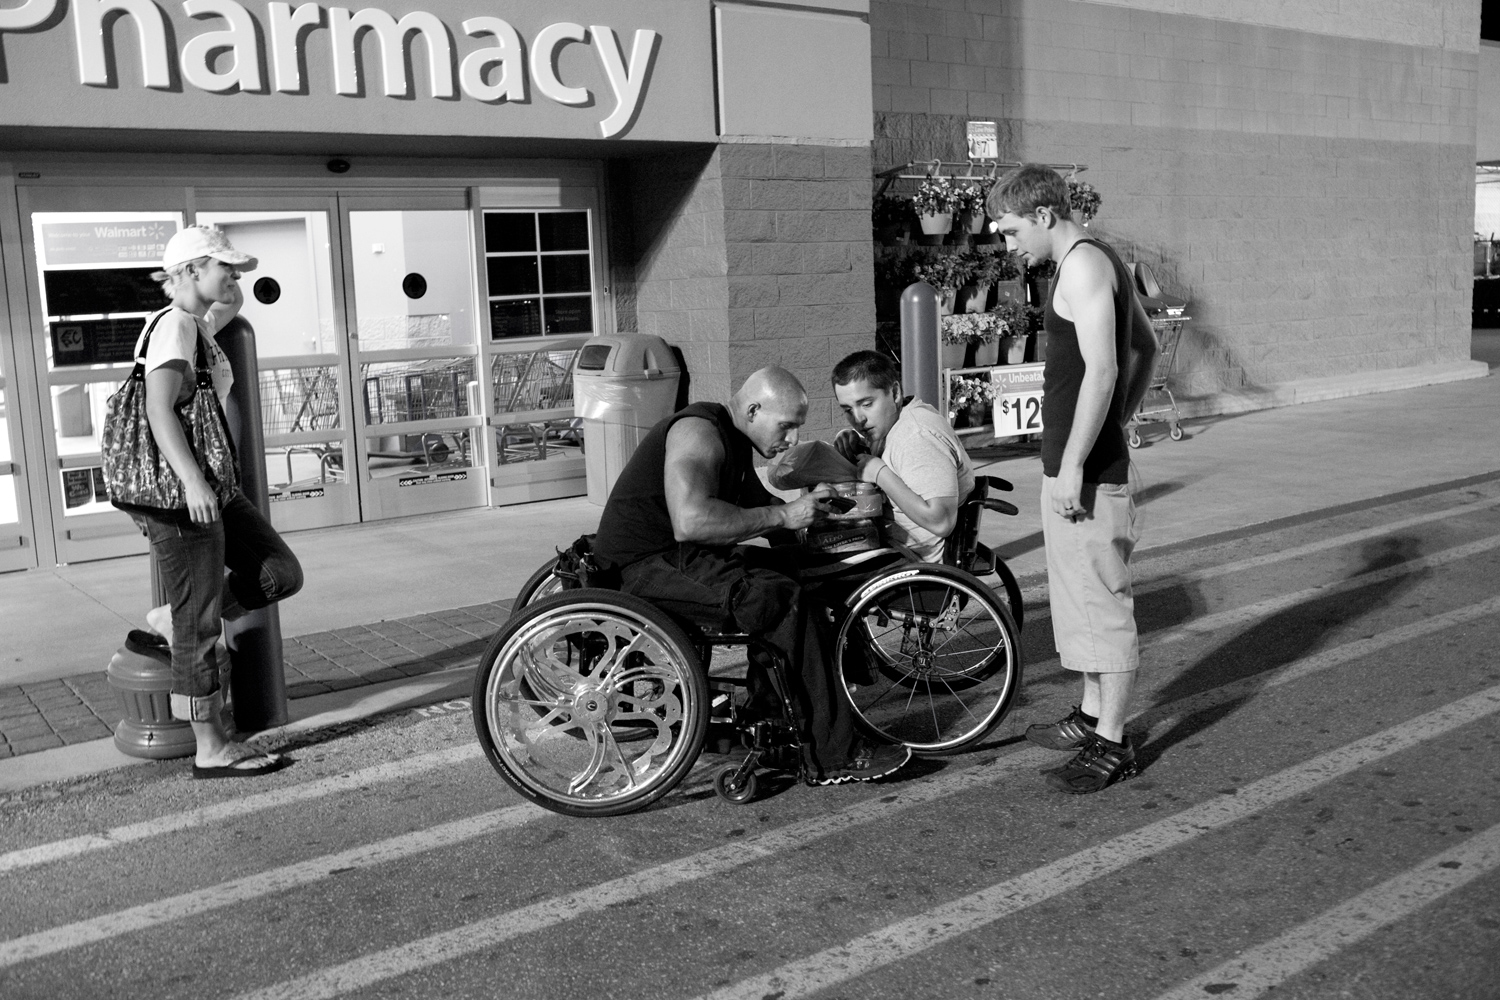 Nick Scott talks to a fan outside of a Walmart in Austin. Scott was shopping for a battery to power his light-up wheelchair when the young man expressed an interest in getting involved with the sport.